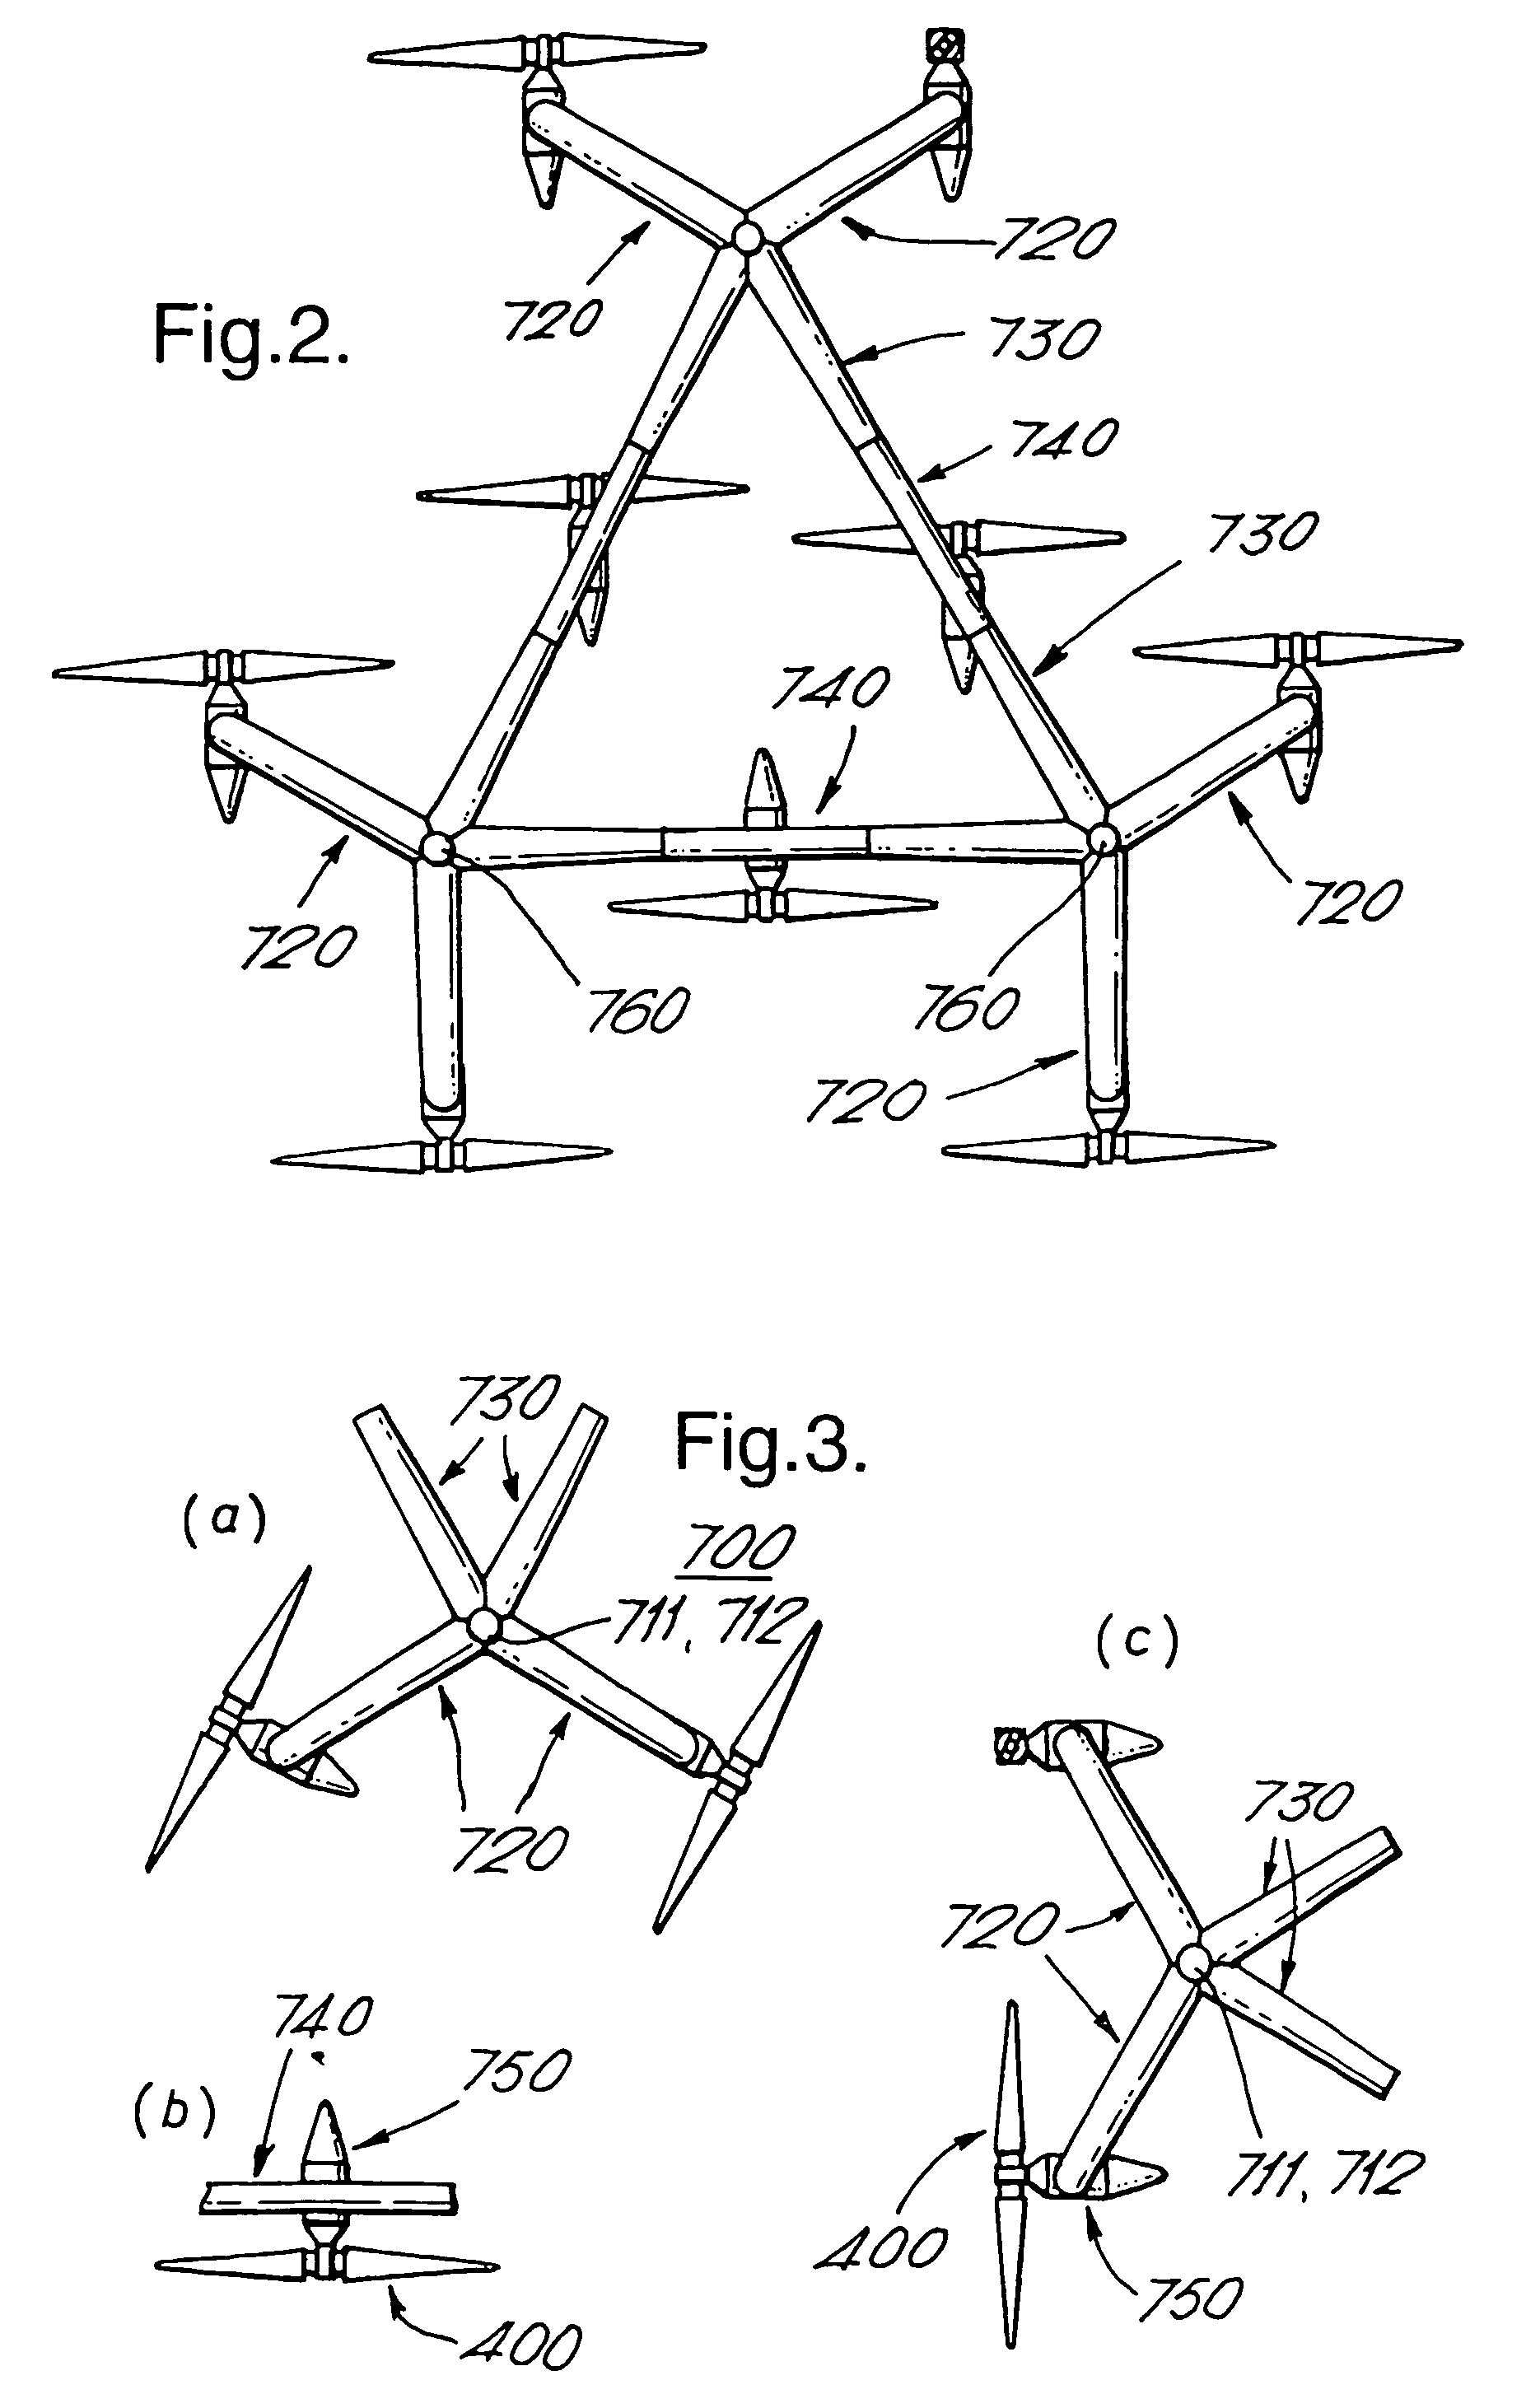 Plant, generator and propeller element for generating energy from watercurrents